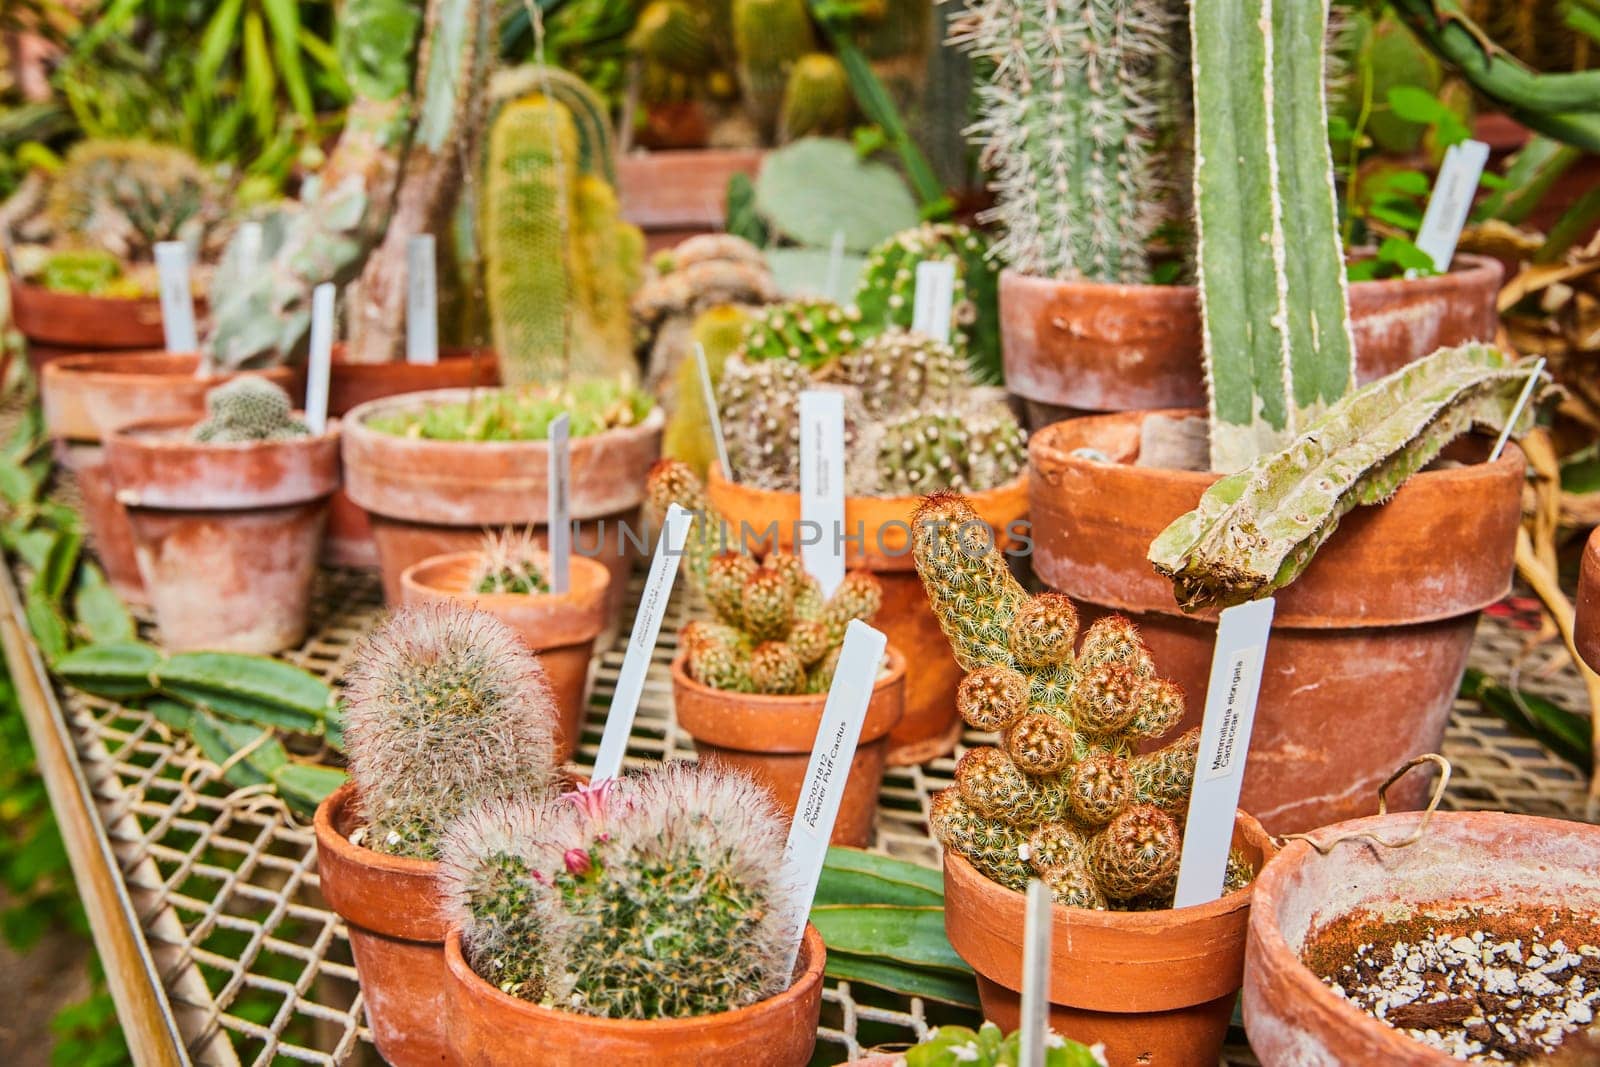 Vibrant array of cacti and succulents in terracotta pots at a well-maintained greenhouse in Muncie, Indiana, 2023